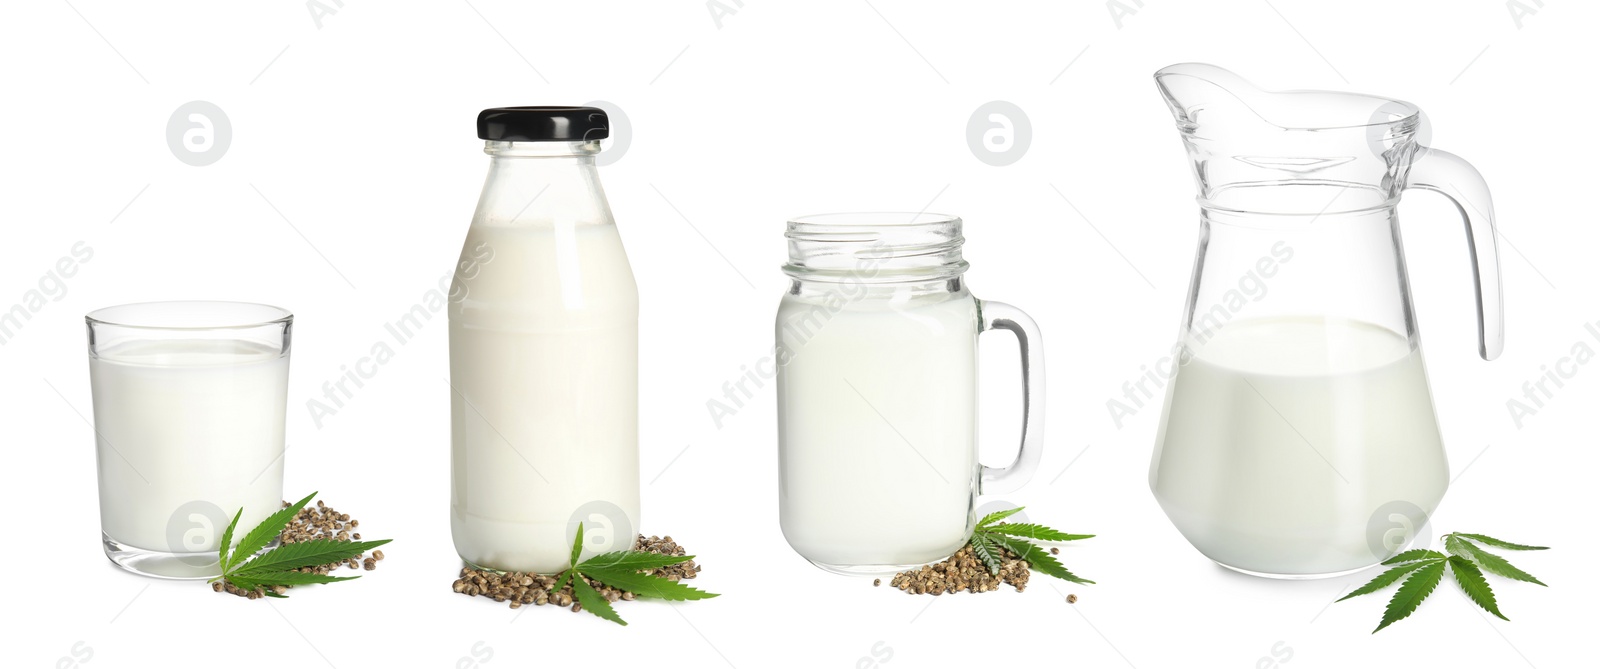 Image of Different glassware with hemp milk on white background, collage. Banner design